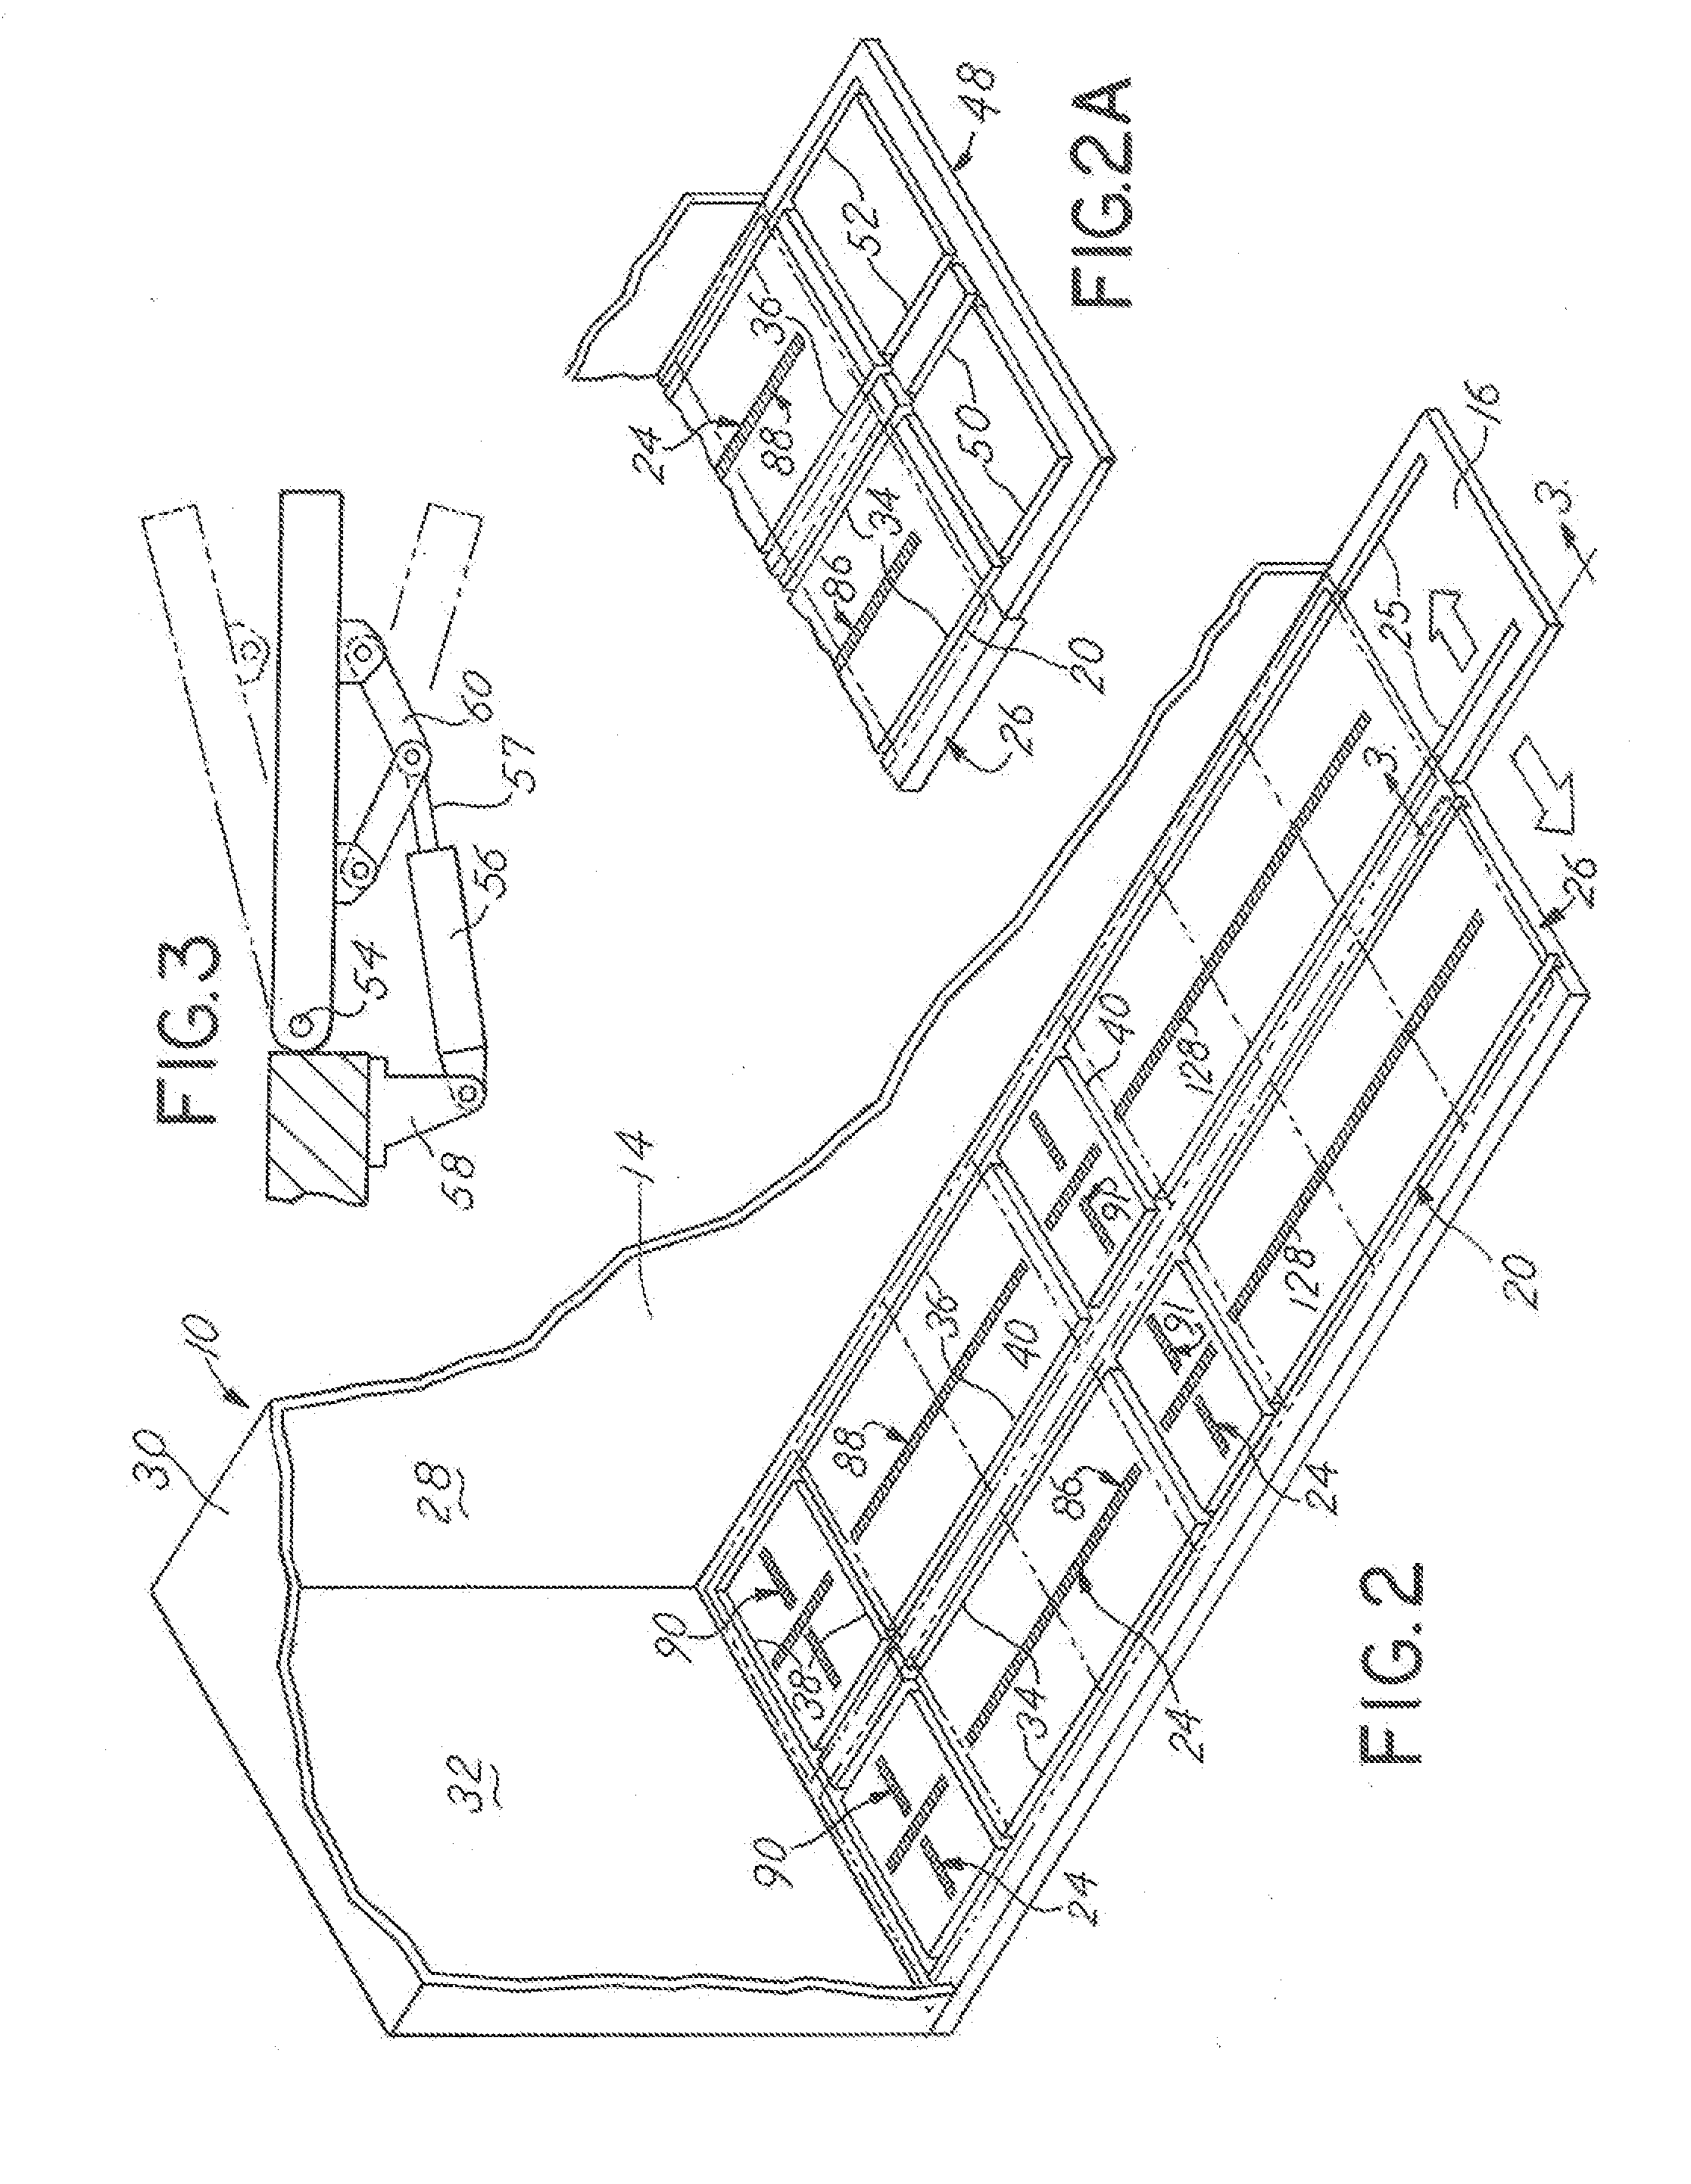 Apparatus and System for Facilitating Loading and Unloading Cargo from Cargo Spaces of Vehicles